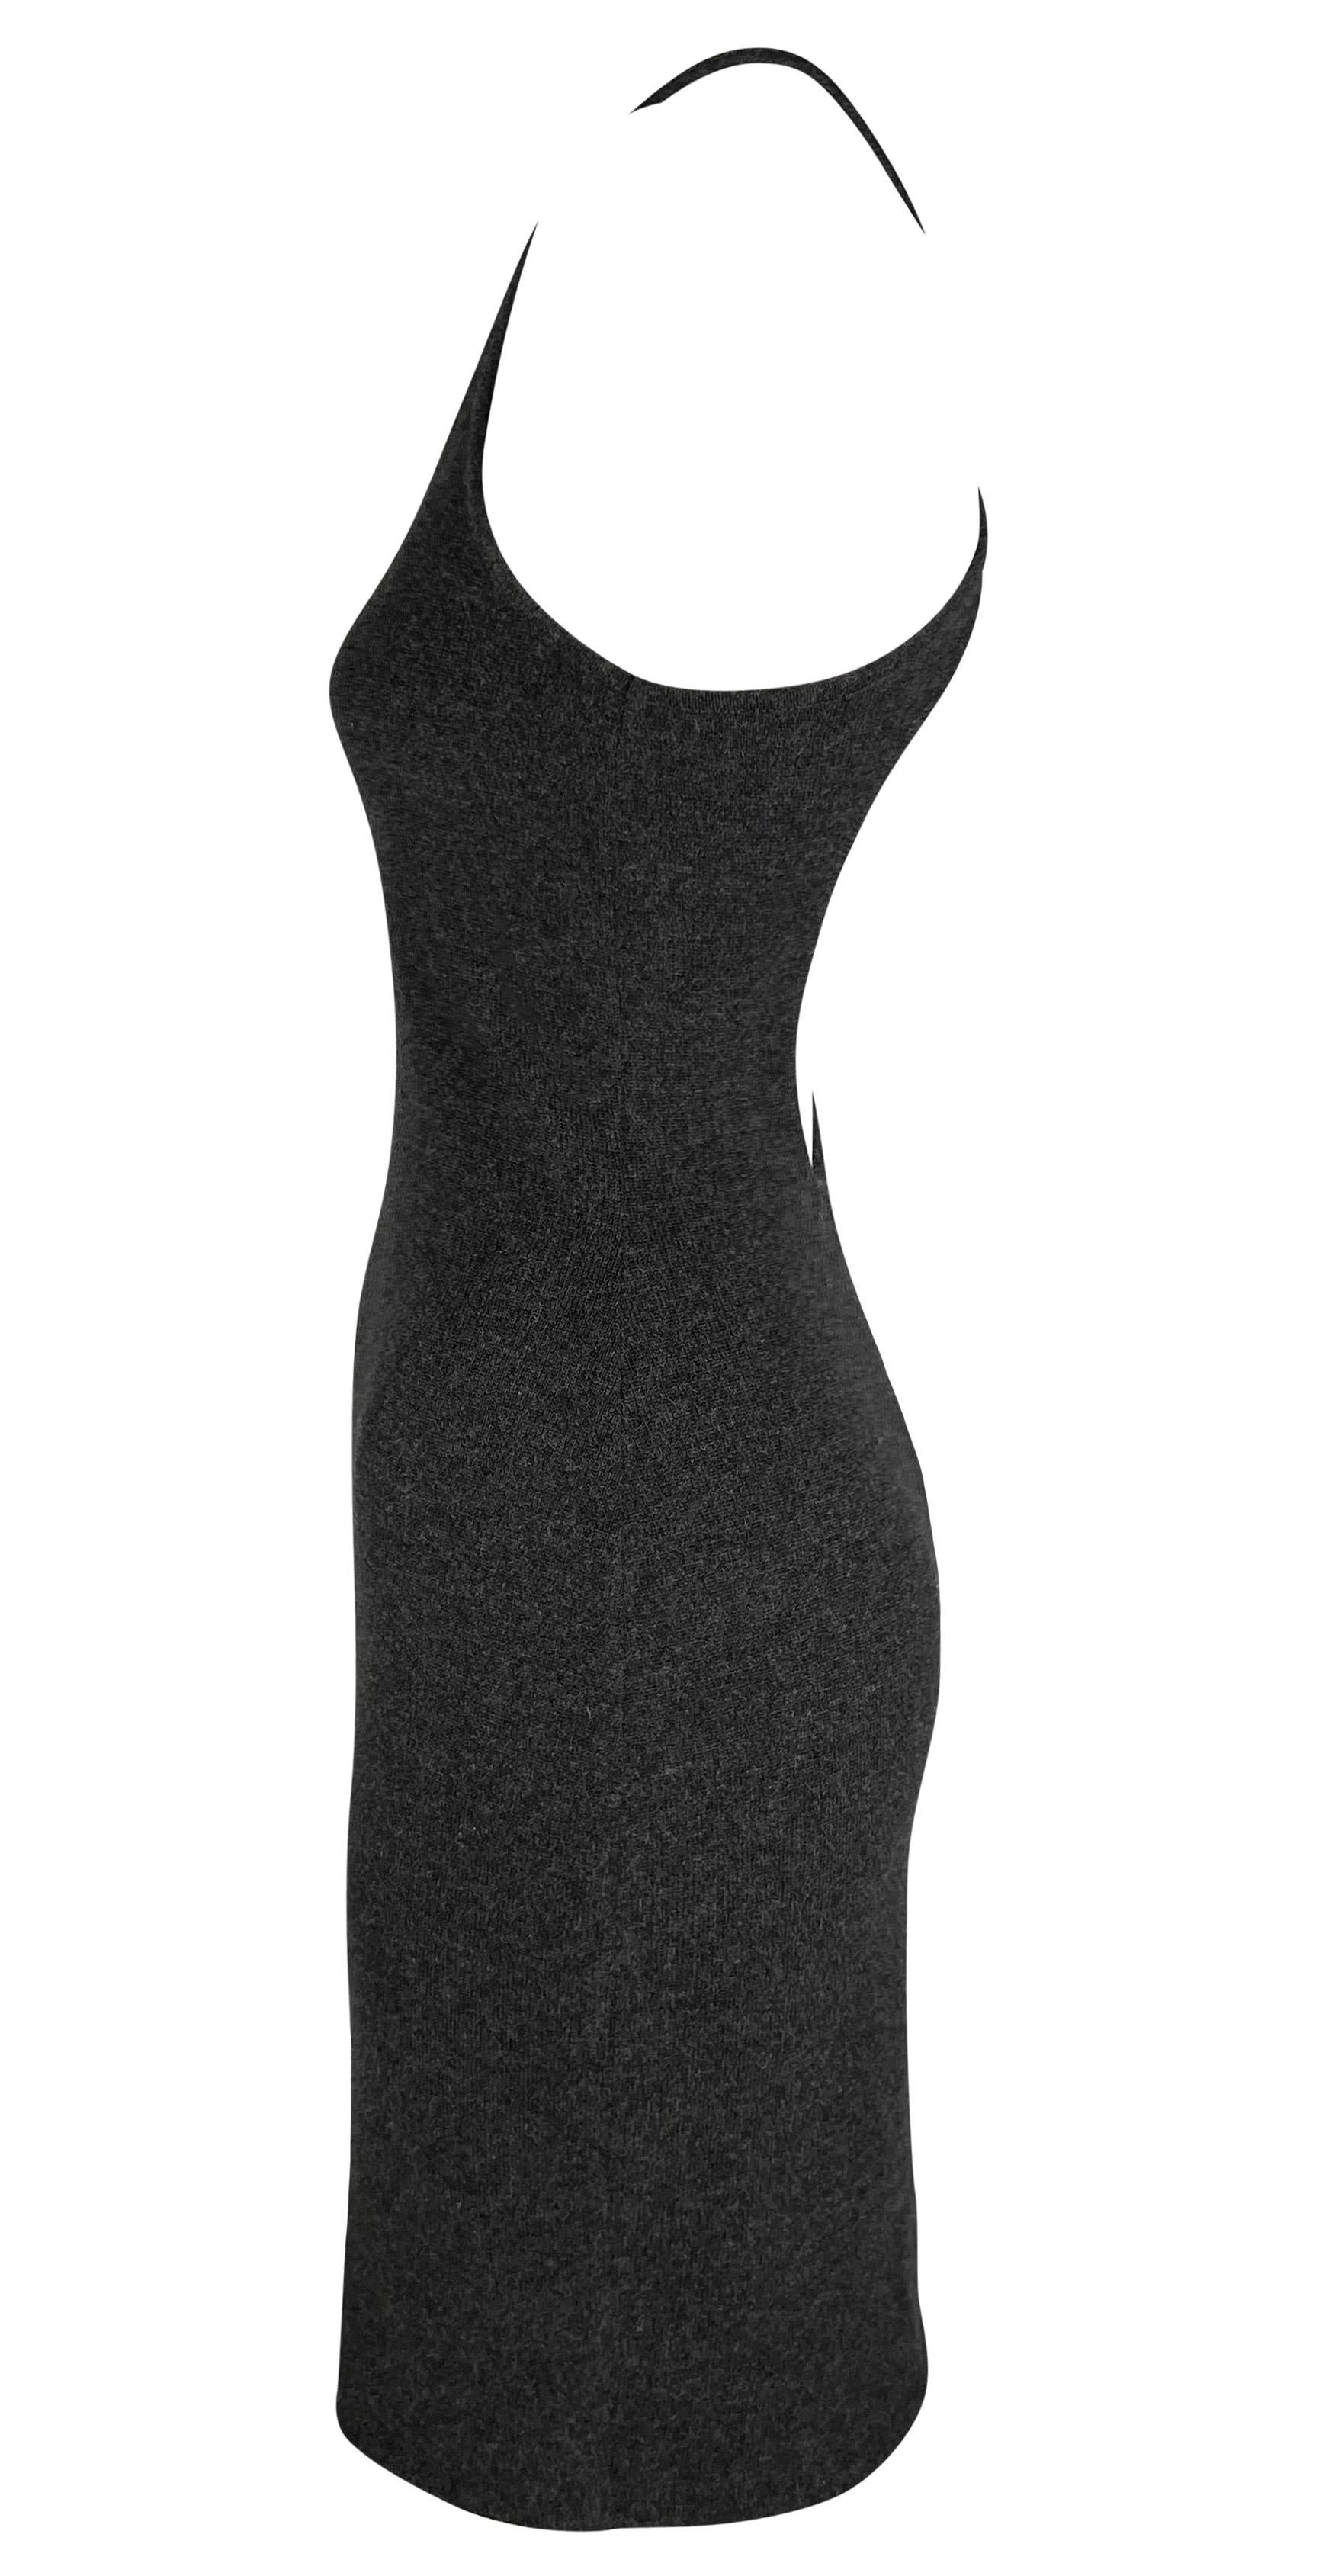 1990s Ralph Lauren Cashmere Knit Backless Charcoal Grey Bodycon Mini Dress For Sale 3